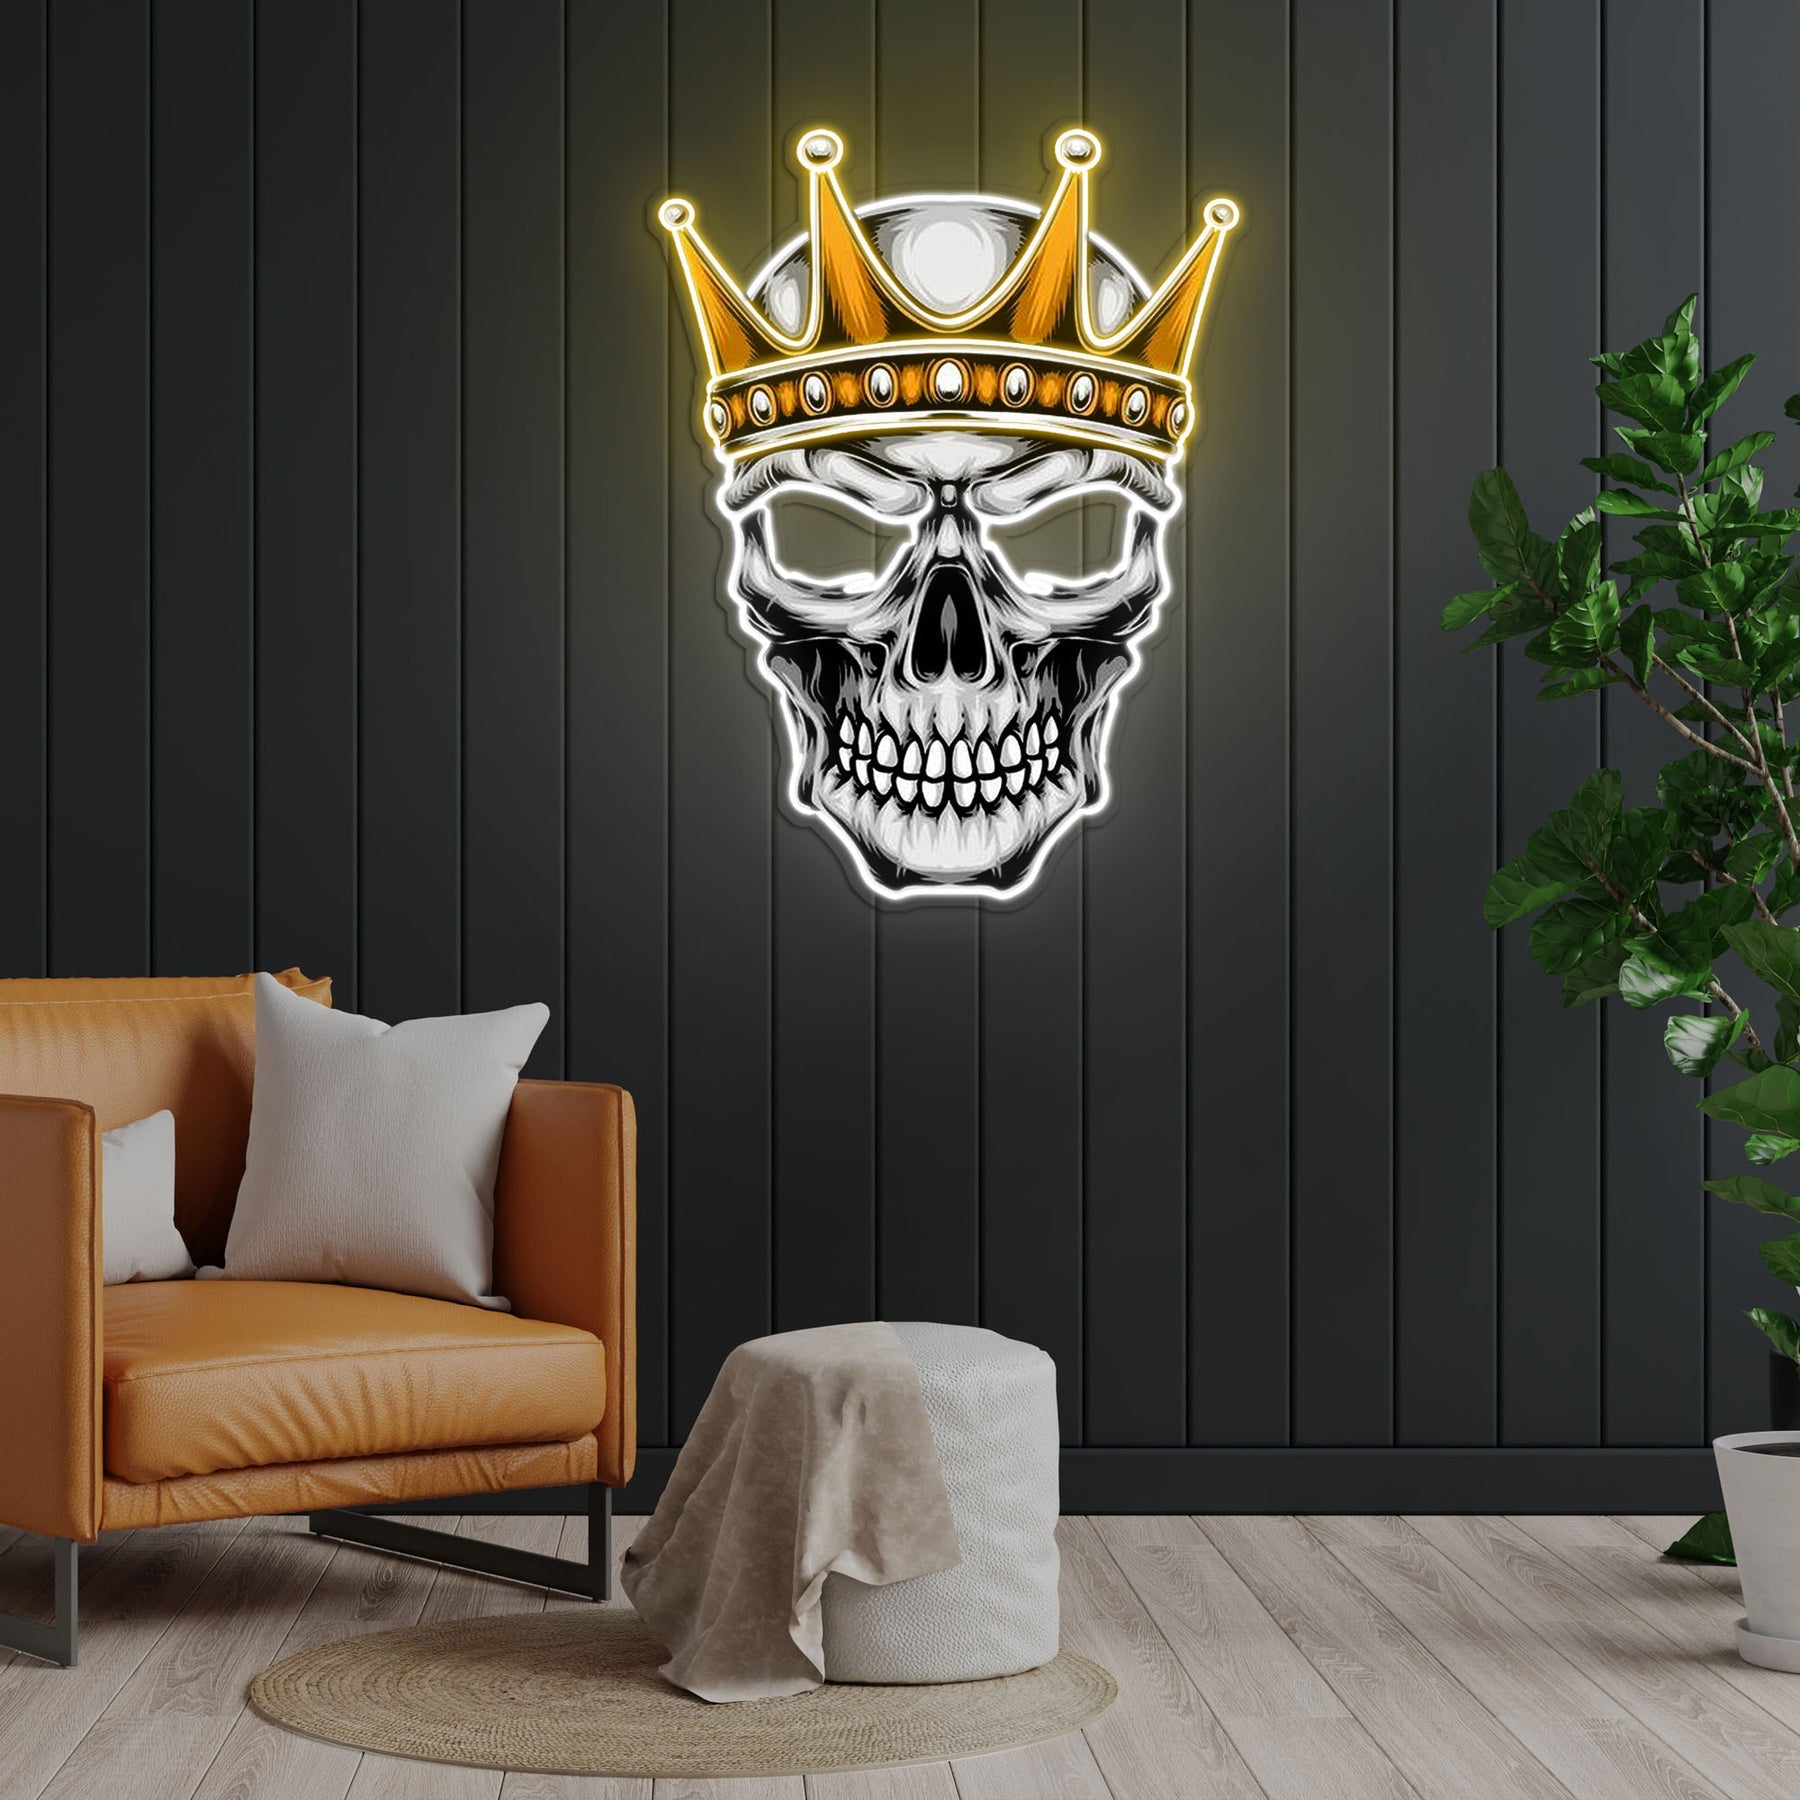 Skull With Crown Led Neon Light